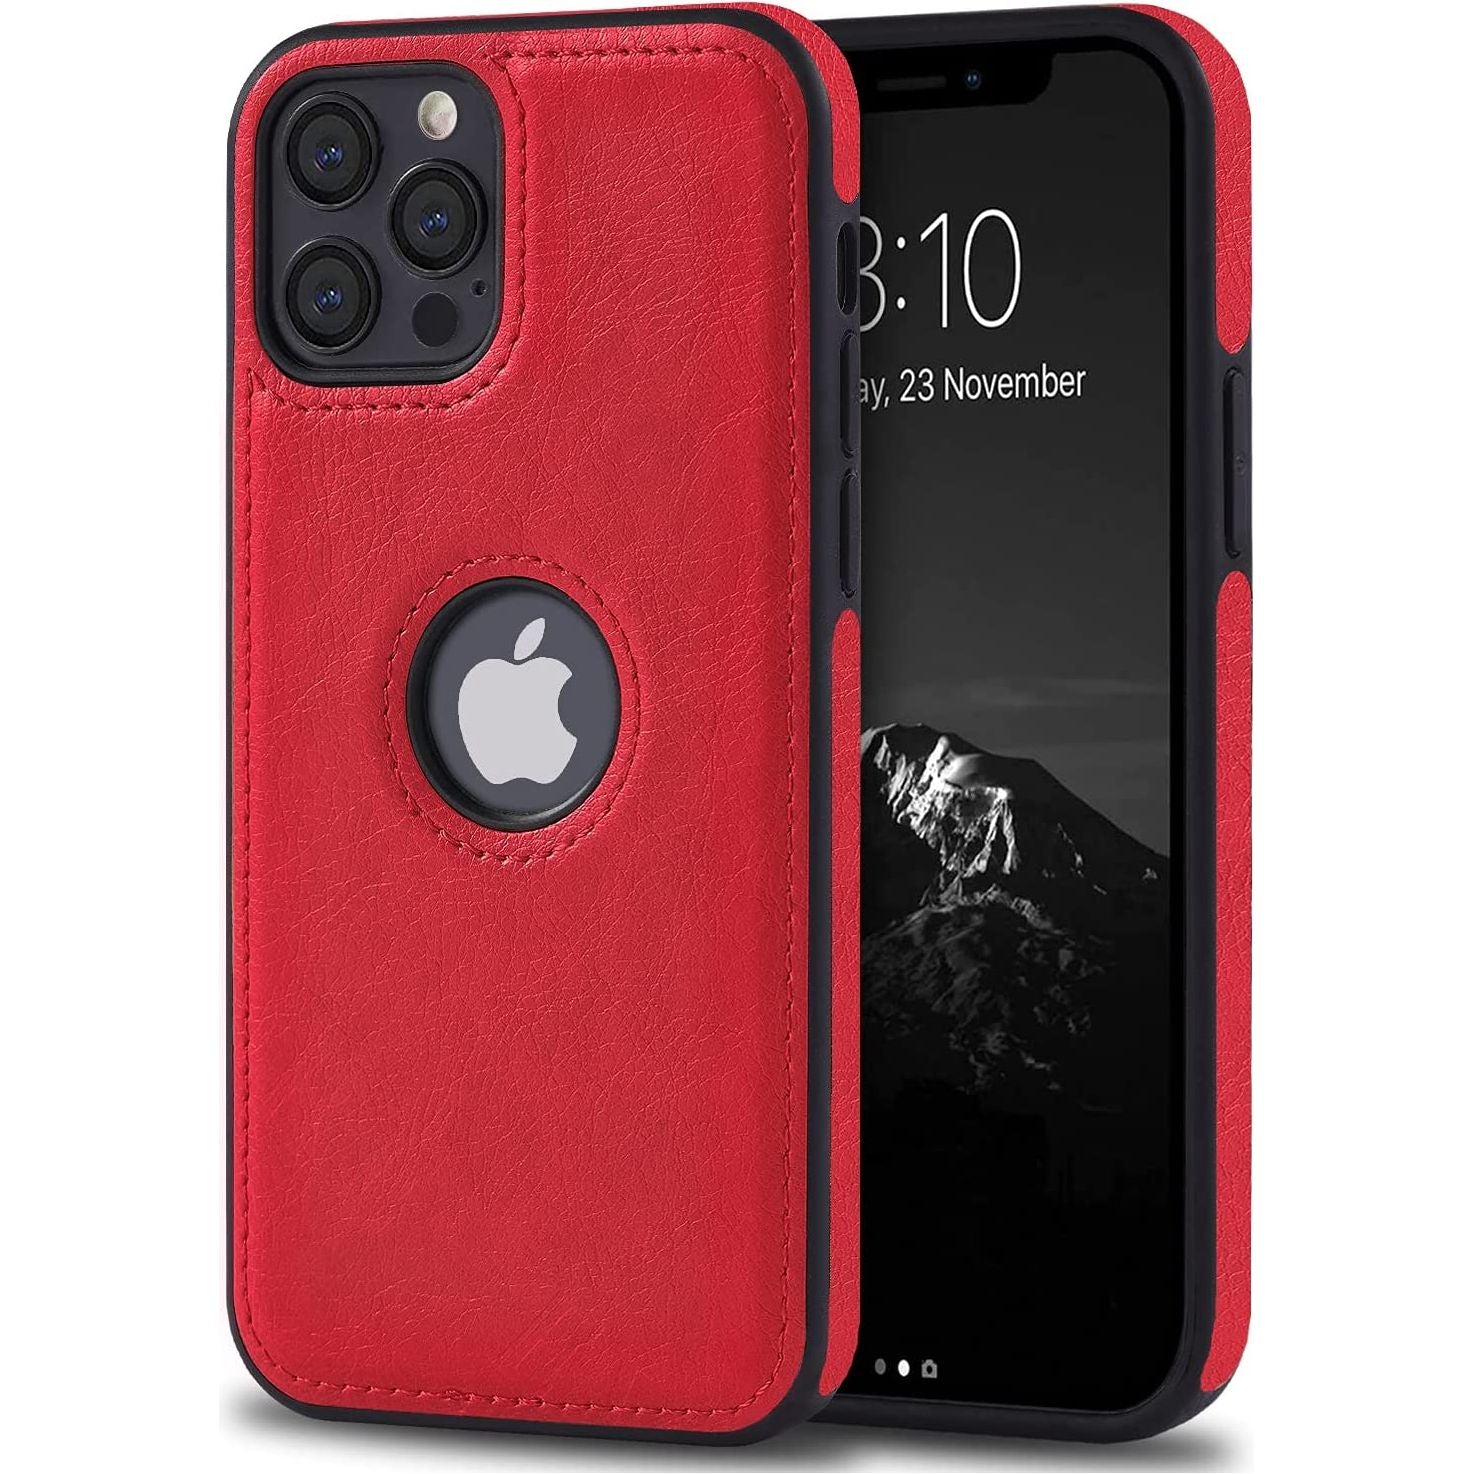 iP 12 Pro Max Leather (Final Stock!)